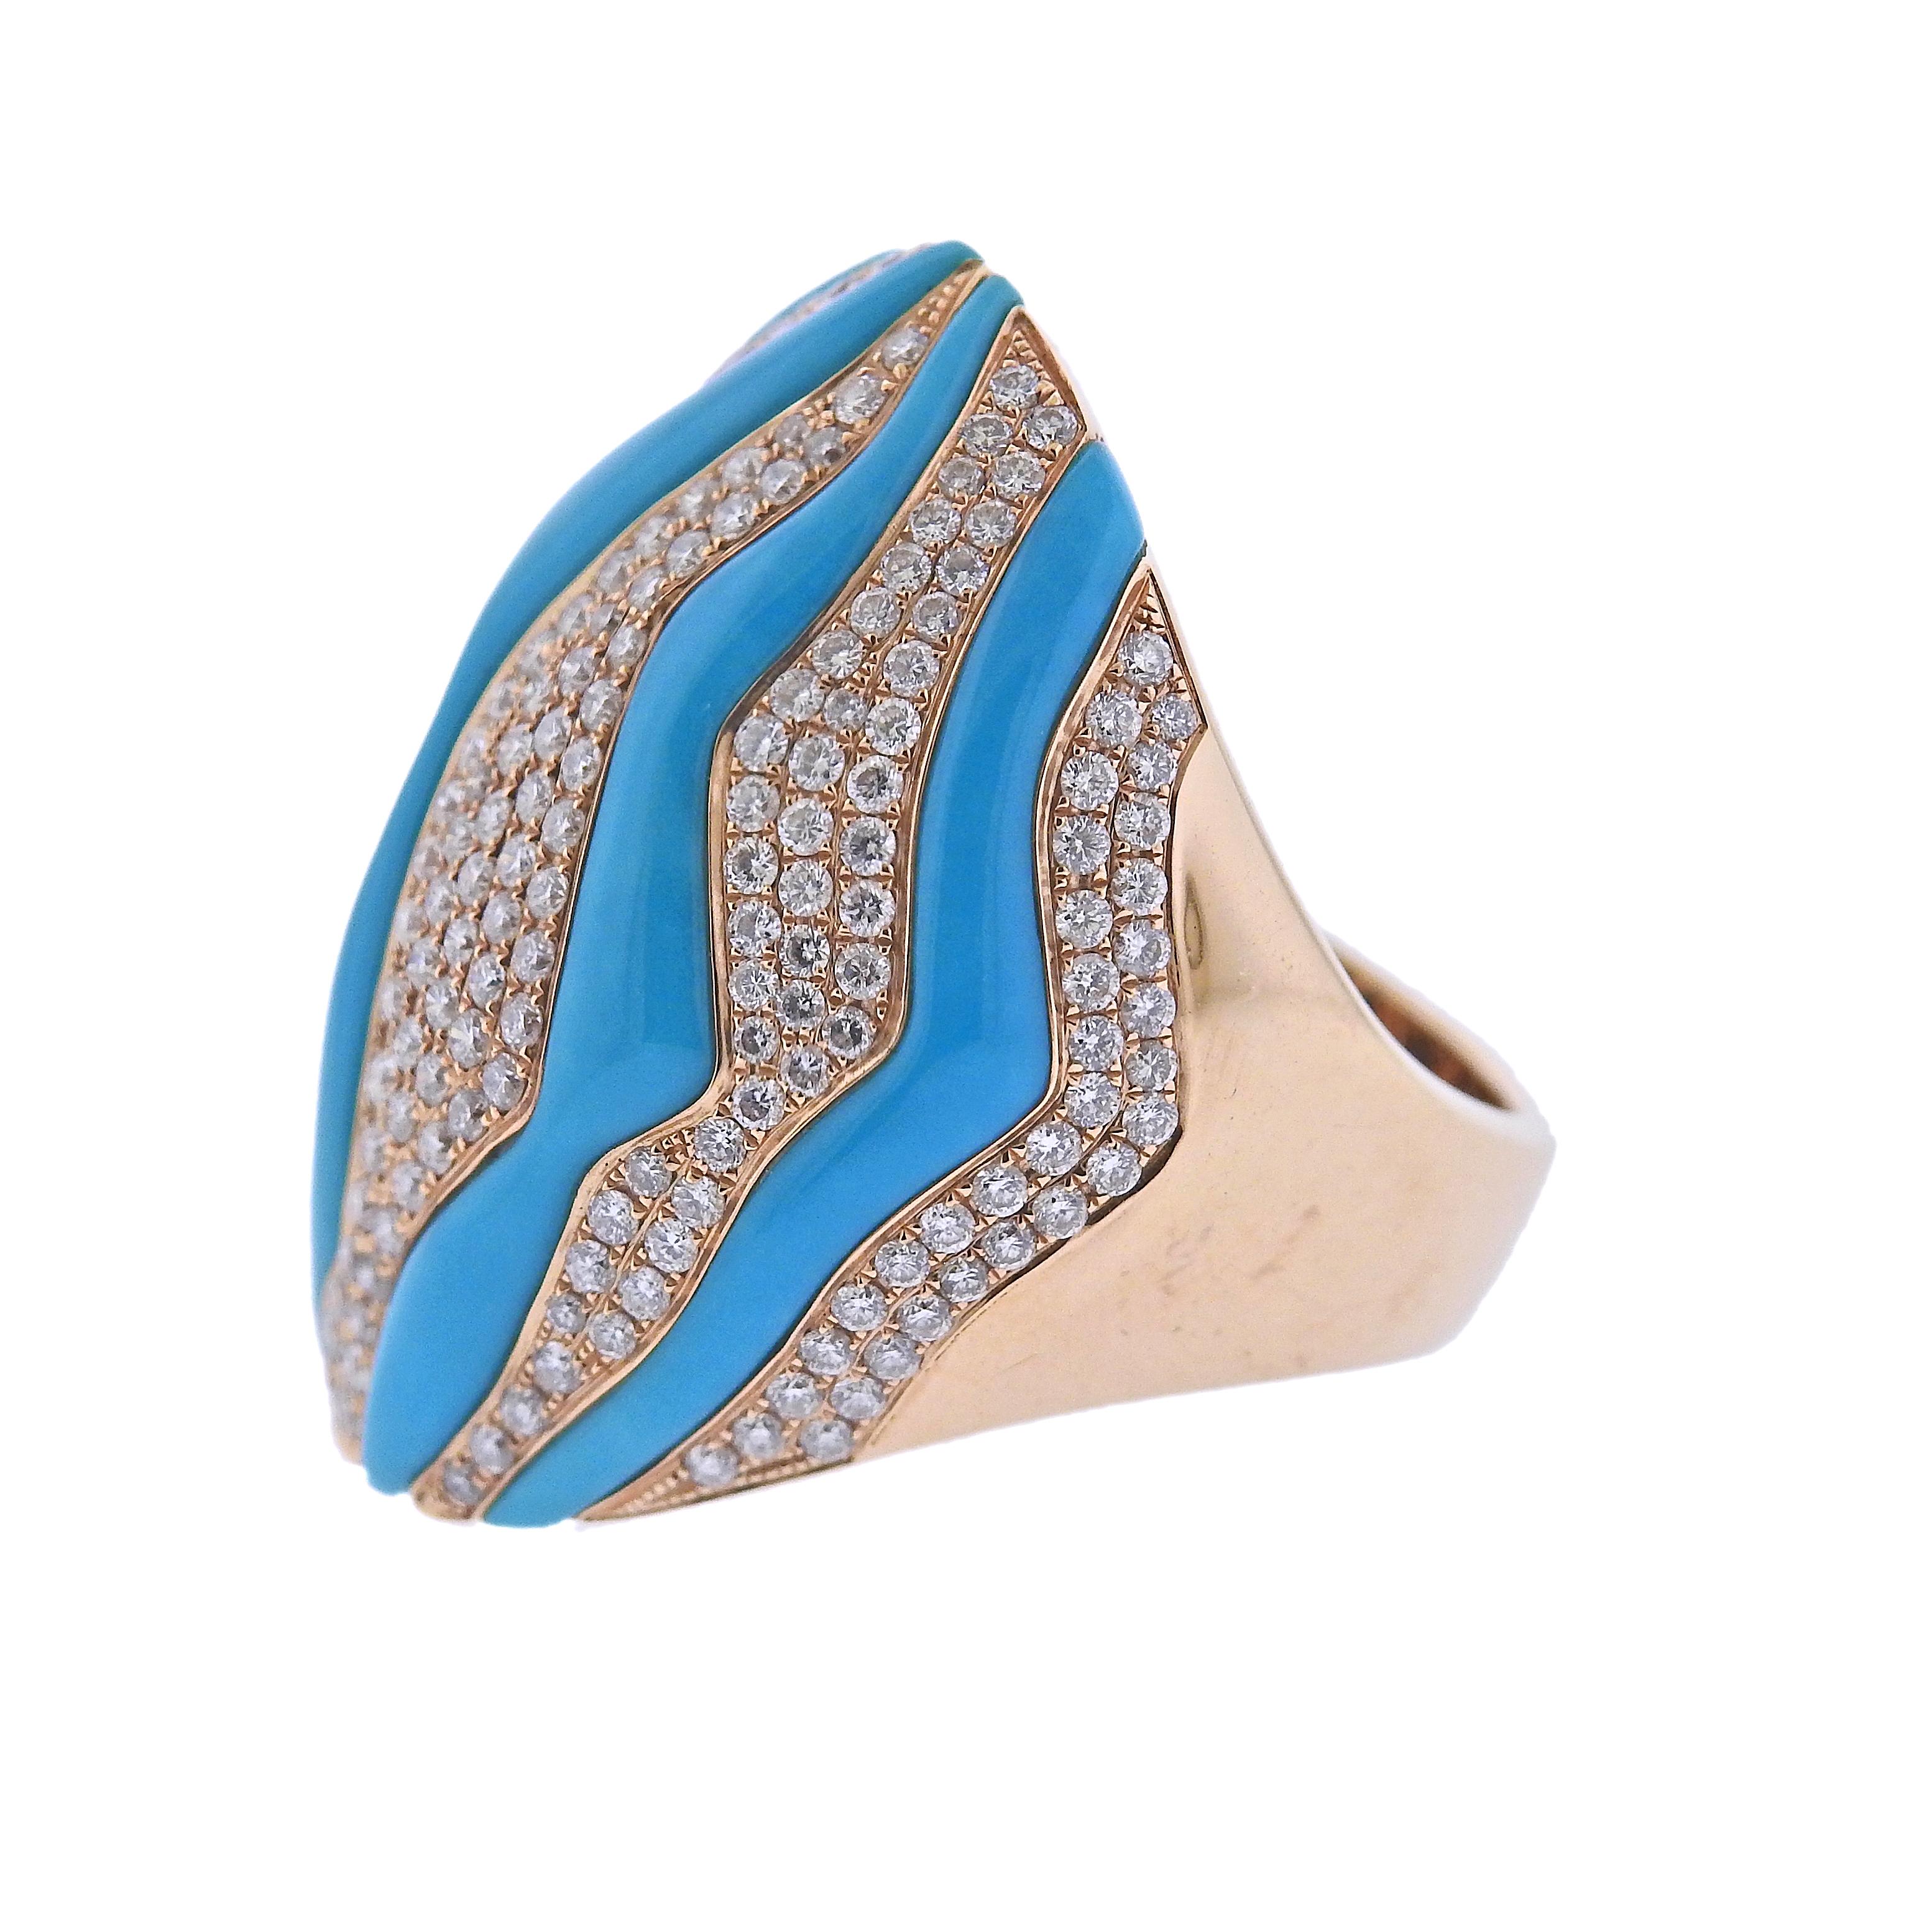 Modern 18k rose gold cocktail ring, with turquoise stripes and approx. 1.30ctw in H/Vs diamonds. Ring size - 8, ring top is 30mm wide. Marked Au750. Weight - 17.8 grams.